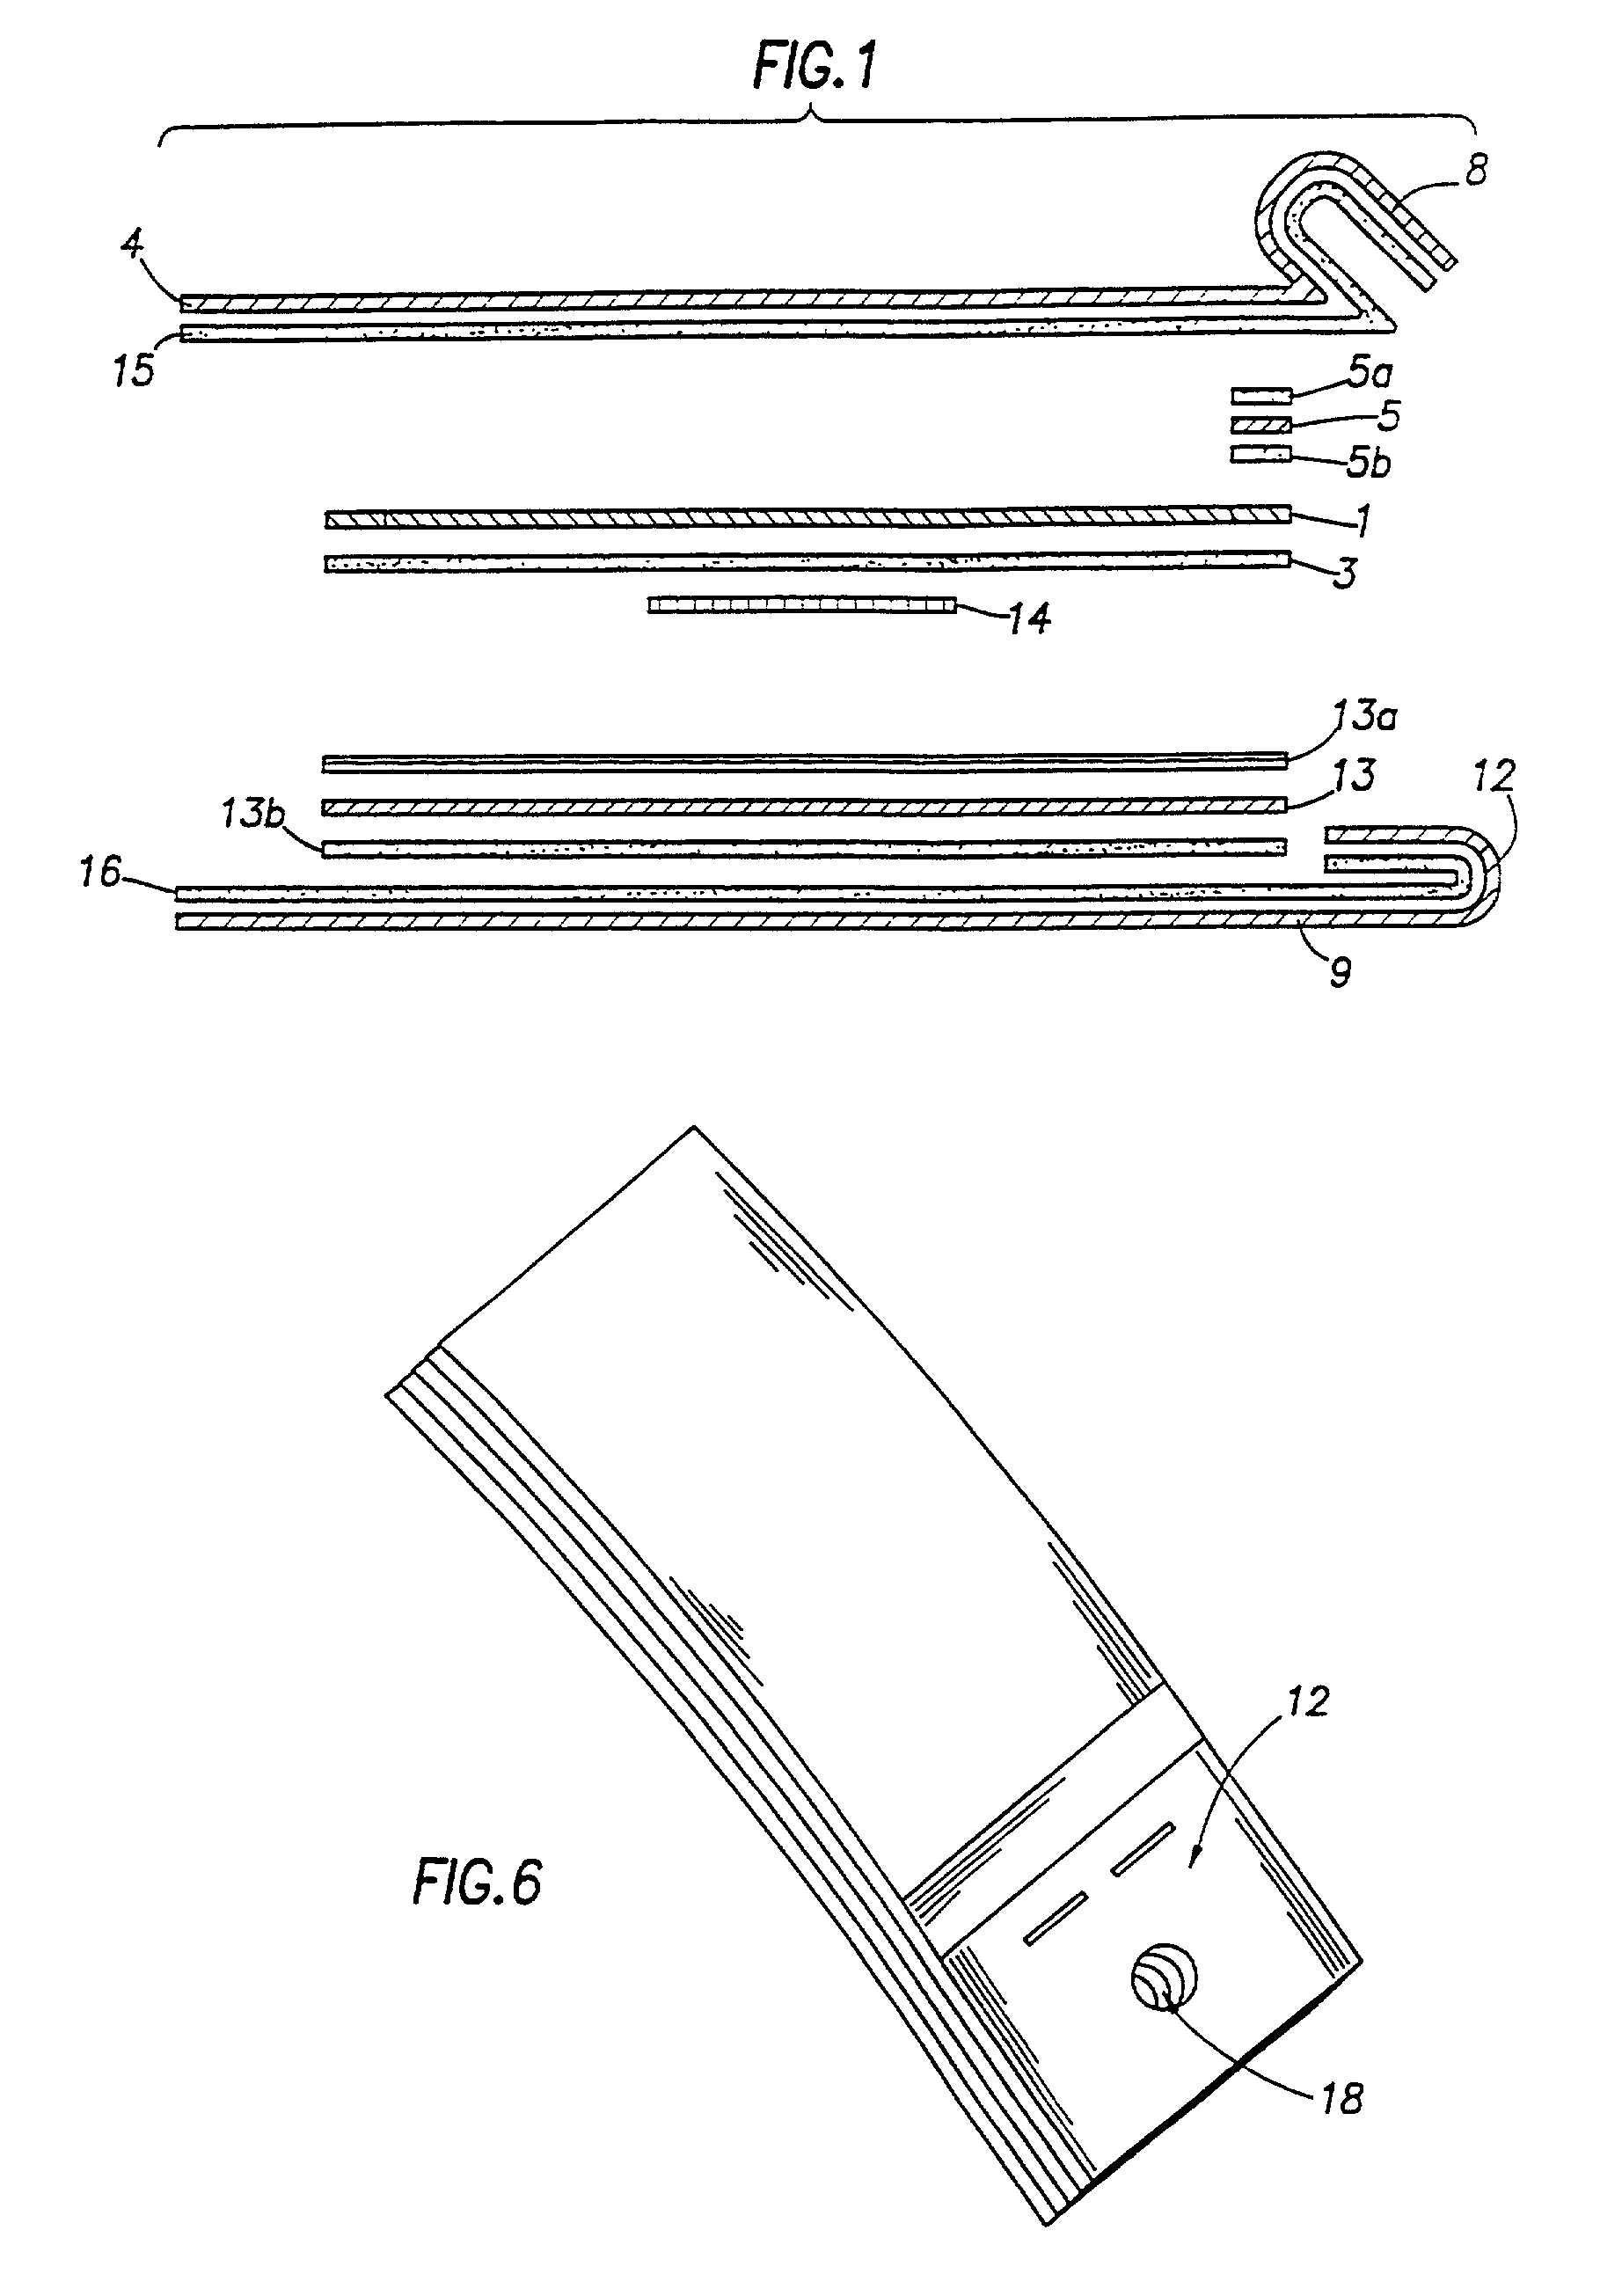 Packaging for adhesive-sided articles to allow one-handed application